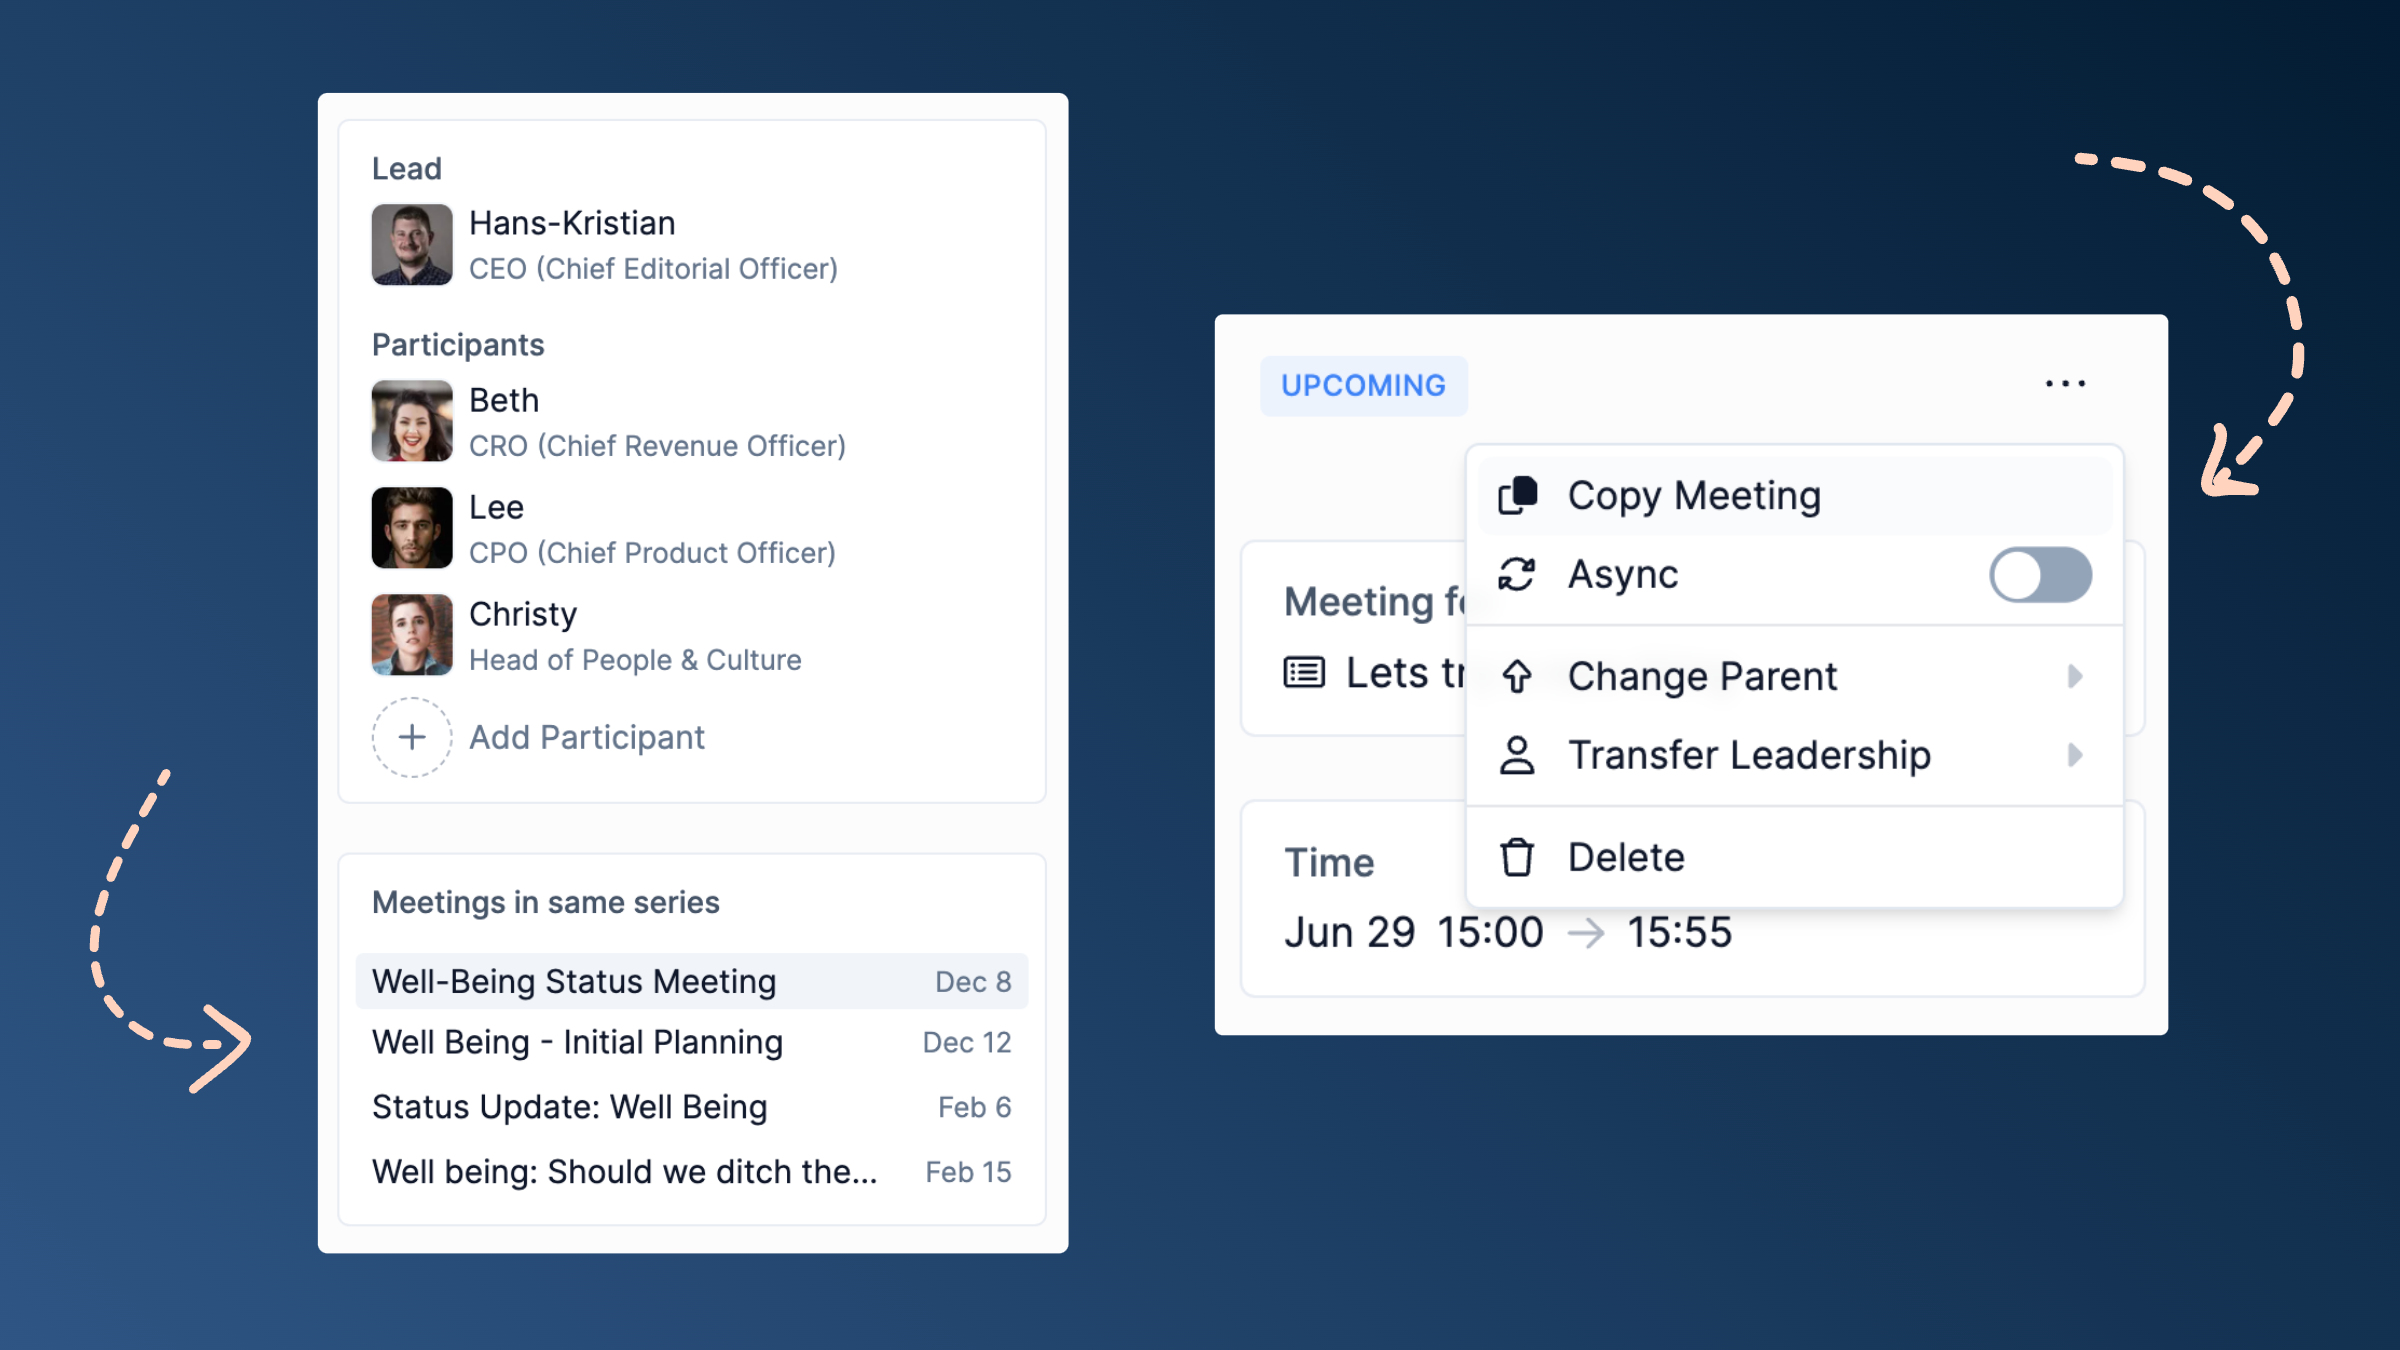 You can now easily navigate between other meetings in the same series and quickly make copies of a meeting.